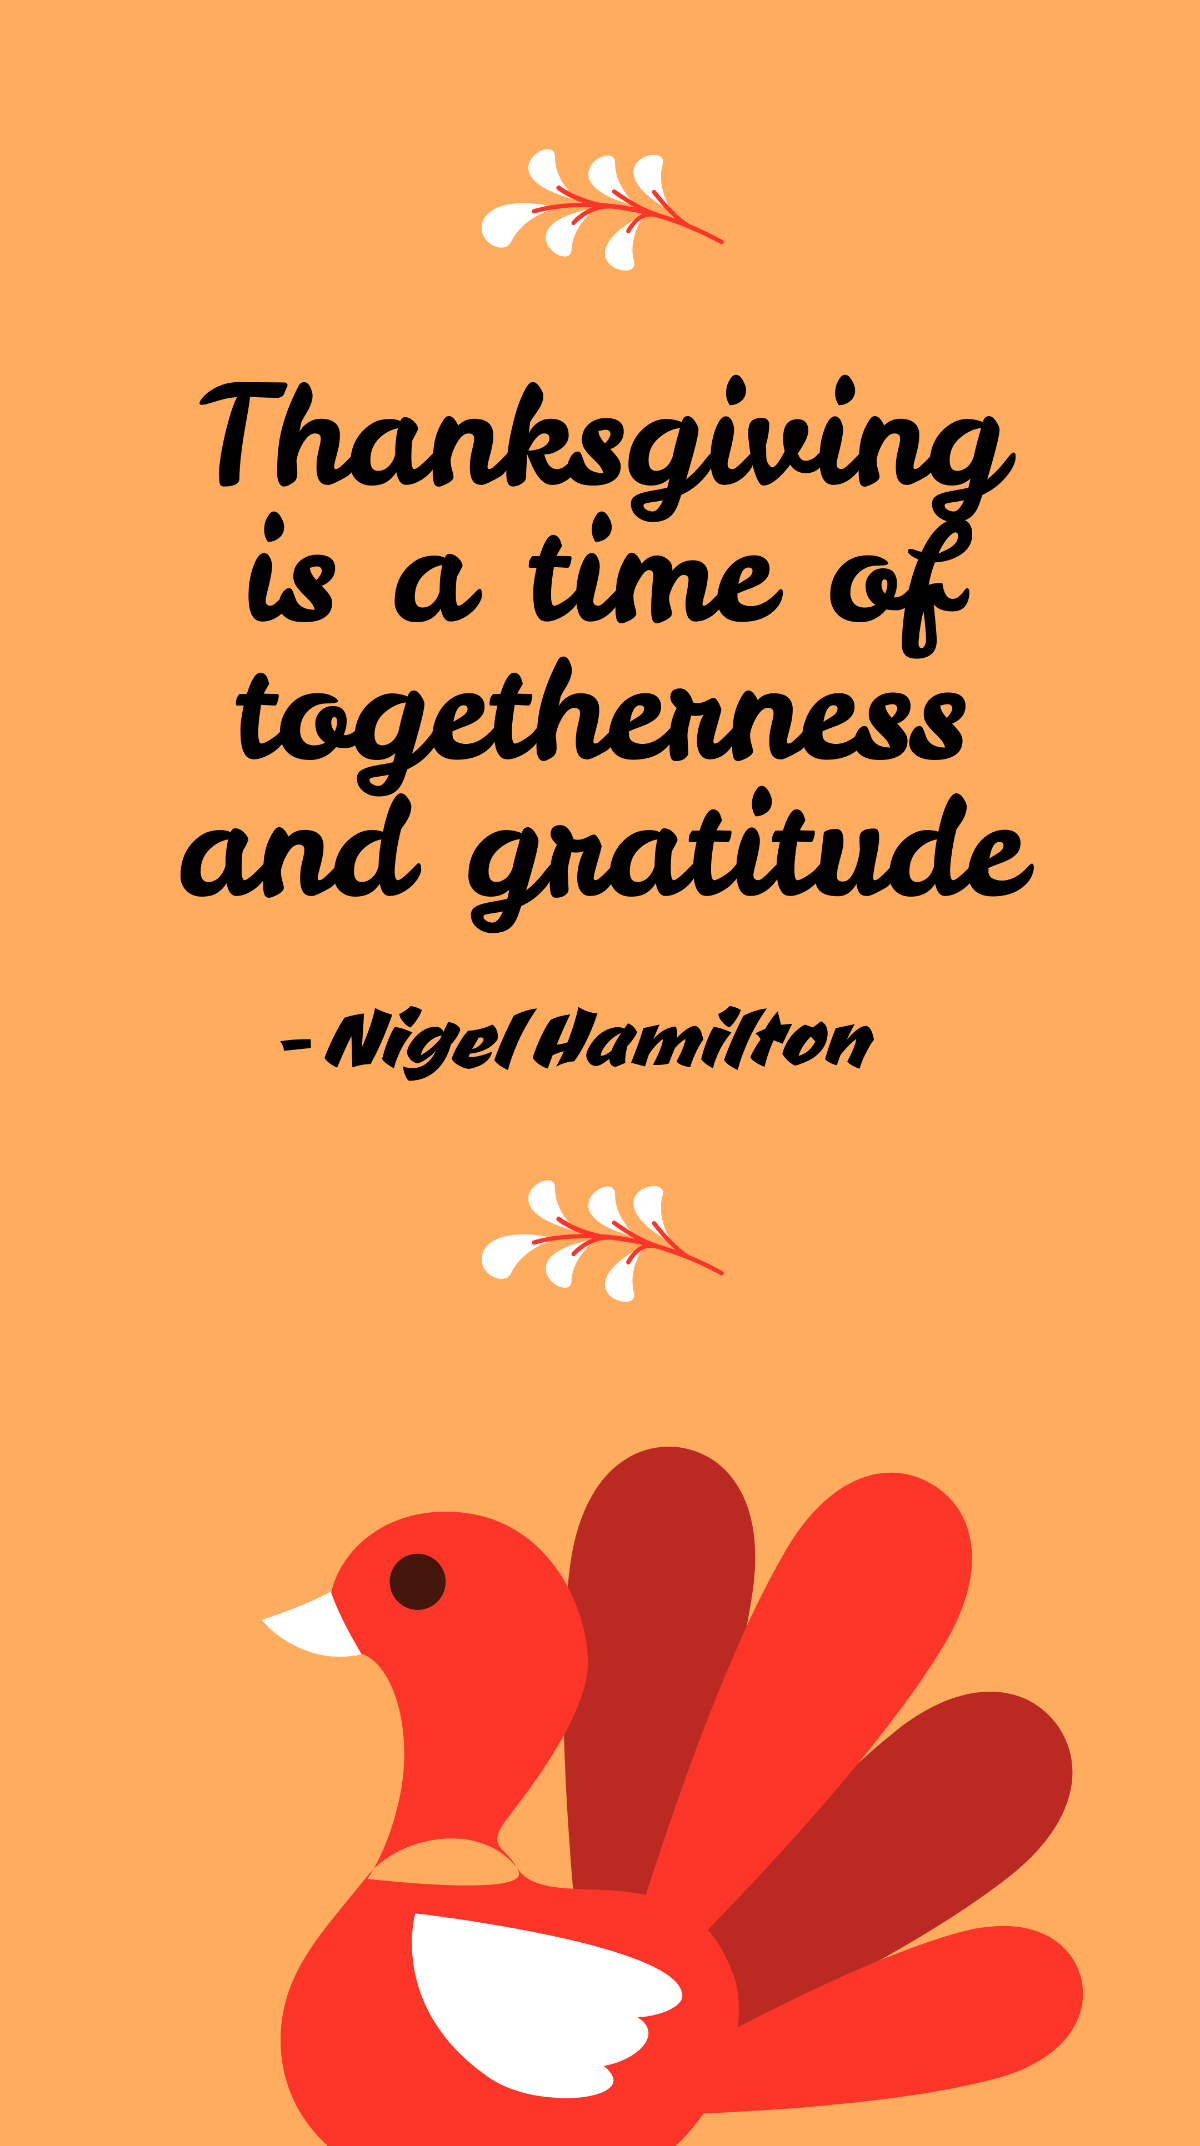 Nigel Hamilton - Thanksgiving is a time of togetherness and gratitude